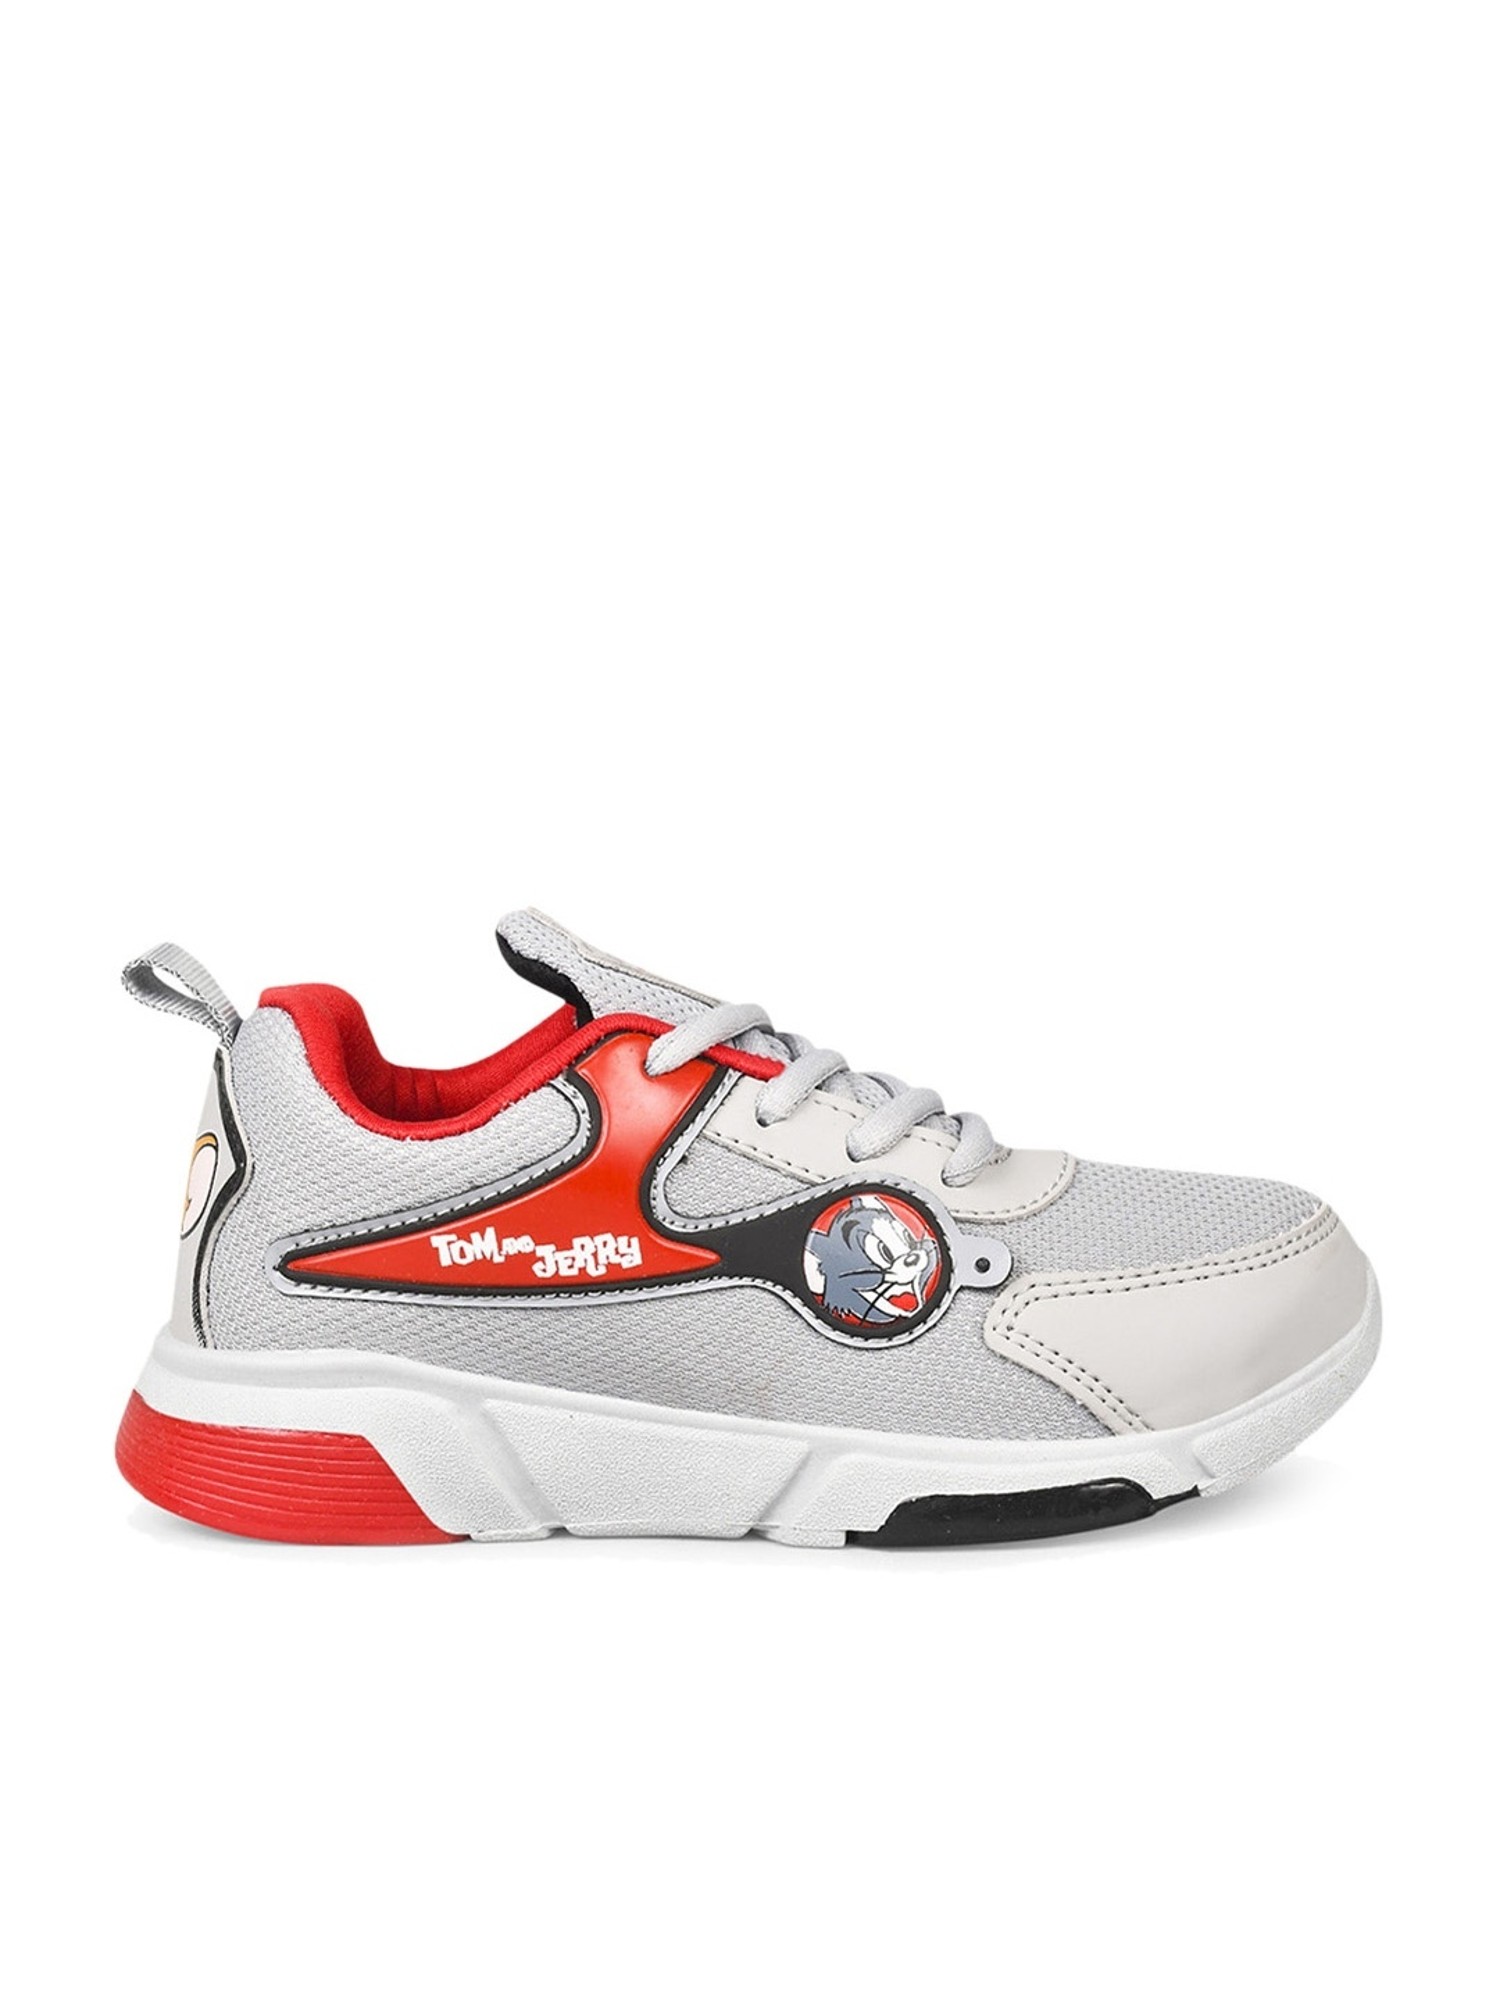 Buy CAMP ZANE Grey Mens Running Shoes online  Campus Shoes